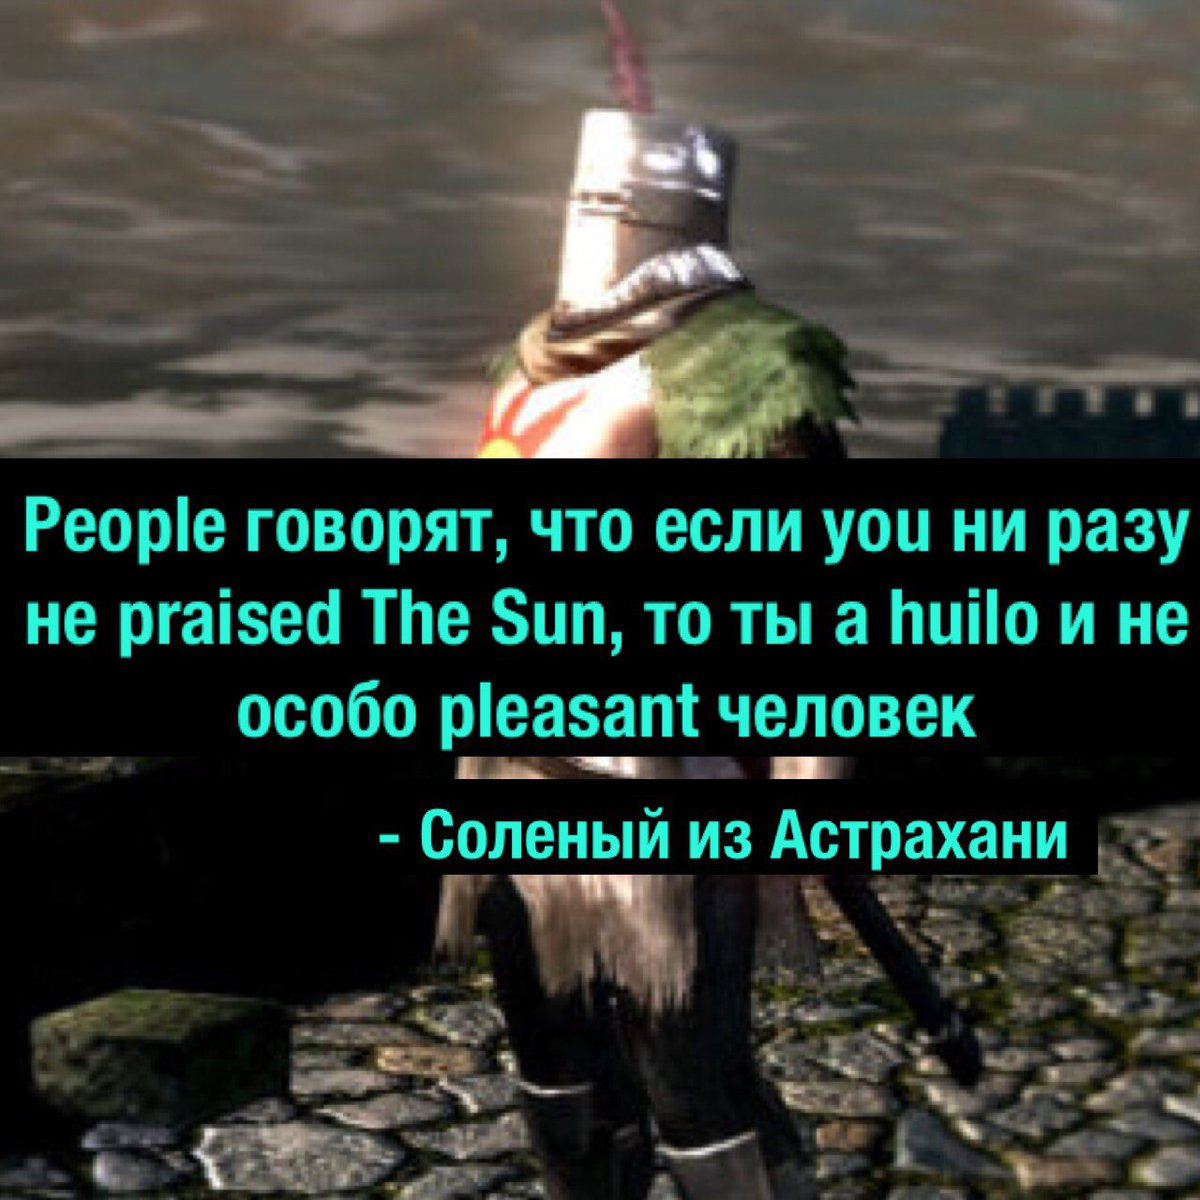 Let's praise the sun! - Dark souls, , Solaire of astora, Degradach, Praise the sun, In contact with, Quotes, Memes